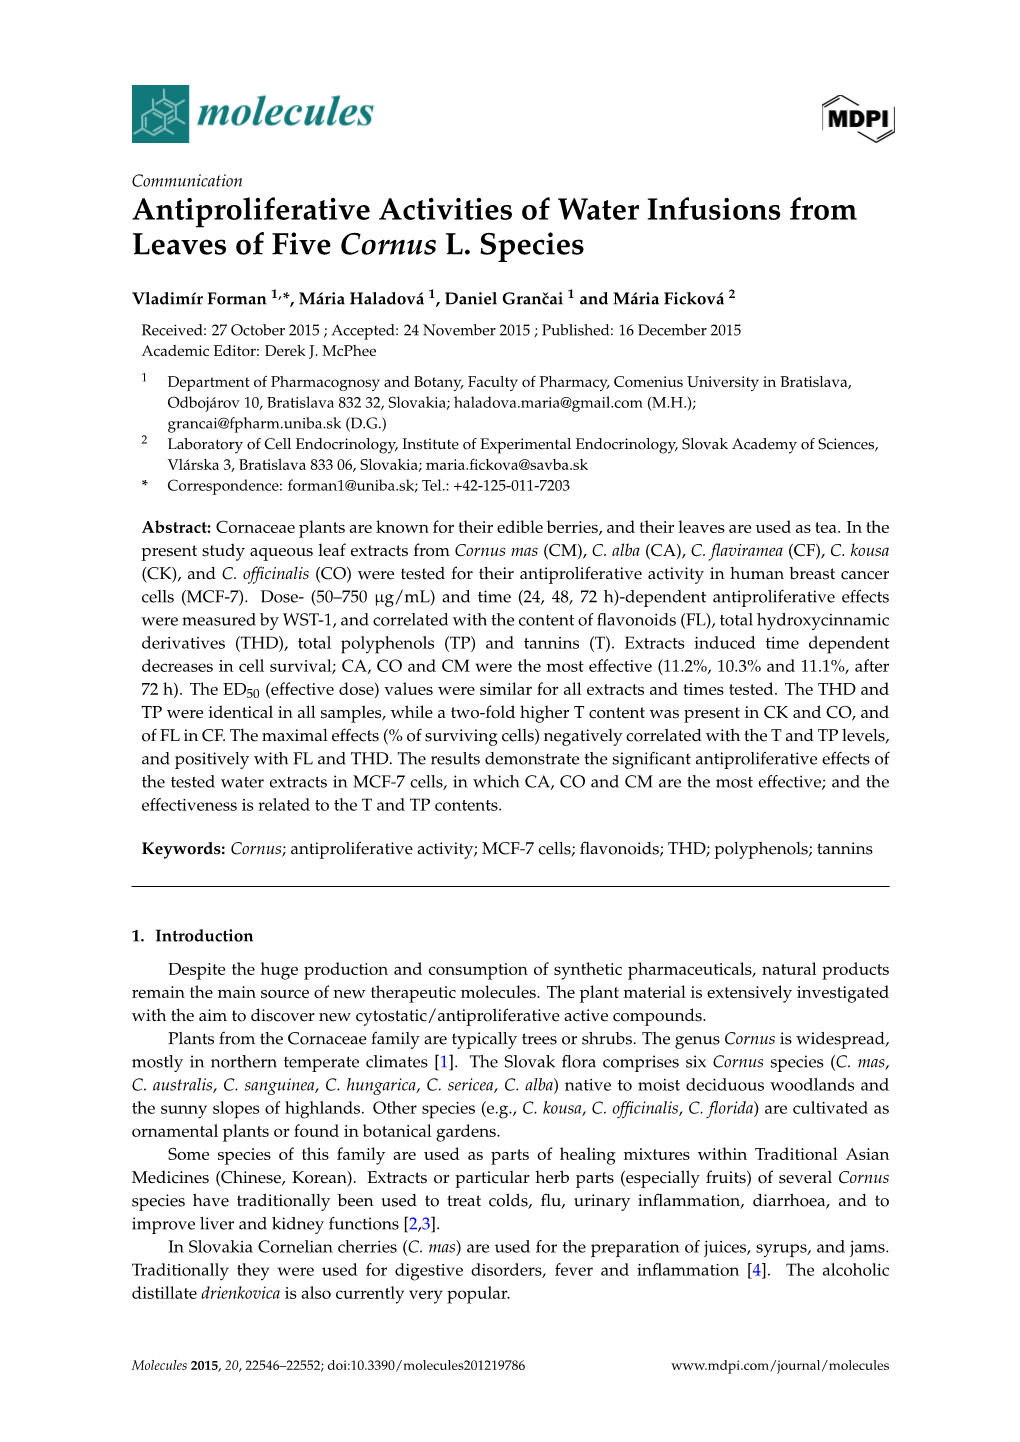 Antiproliferative Activities of Water Infusions from Leaves of Five Cornus L